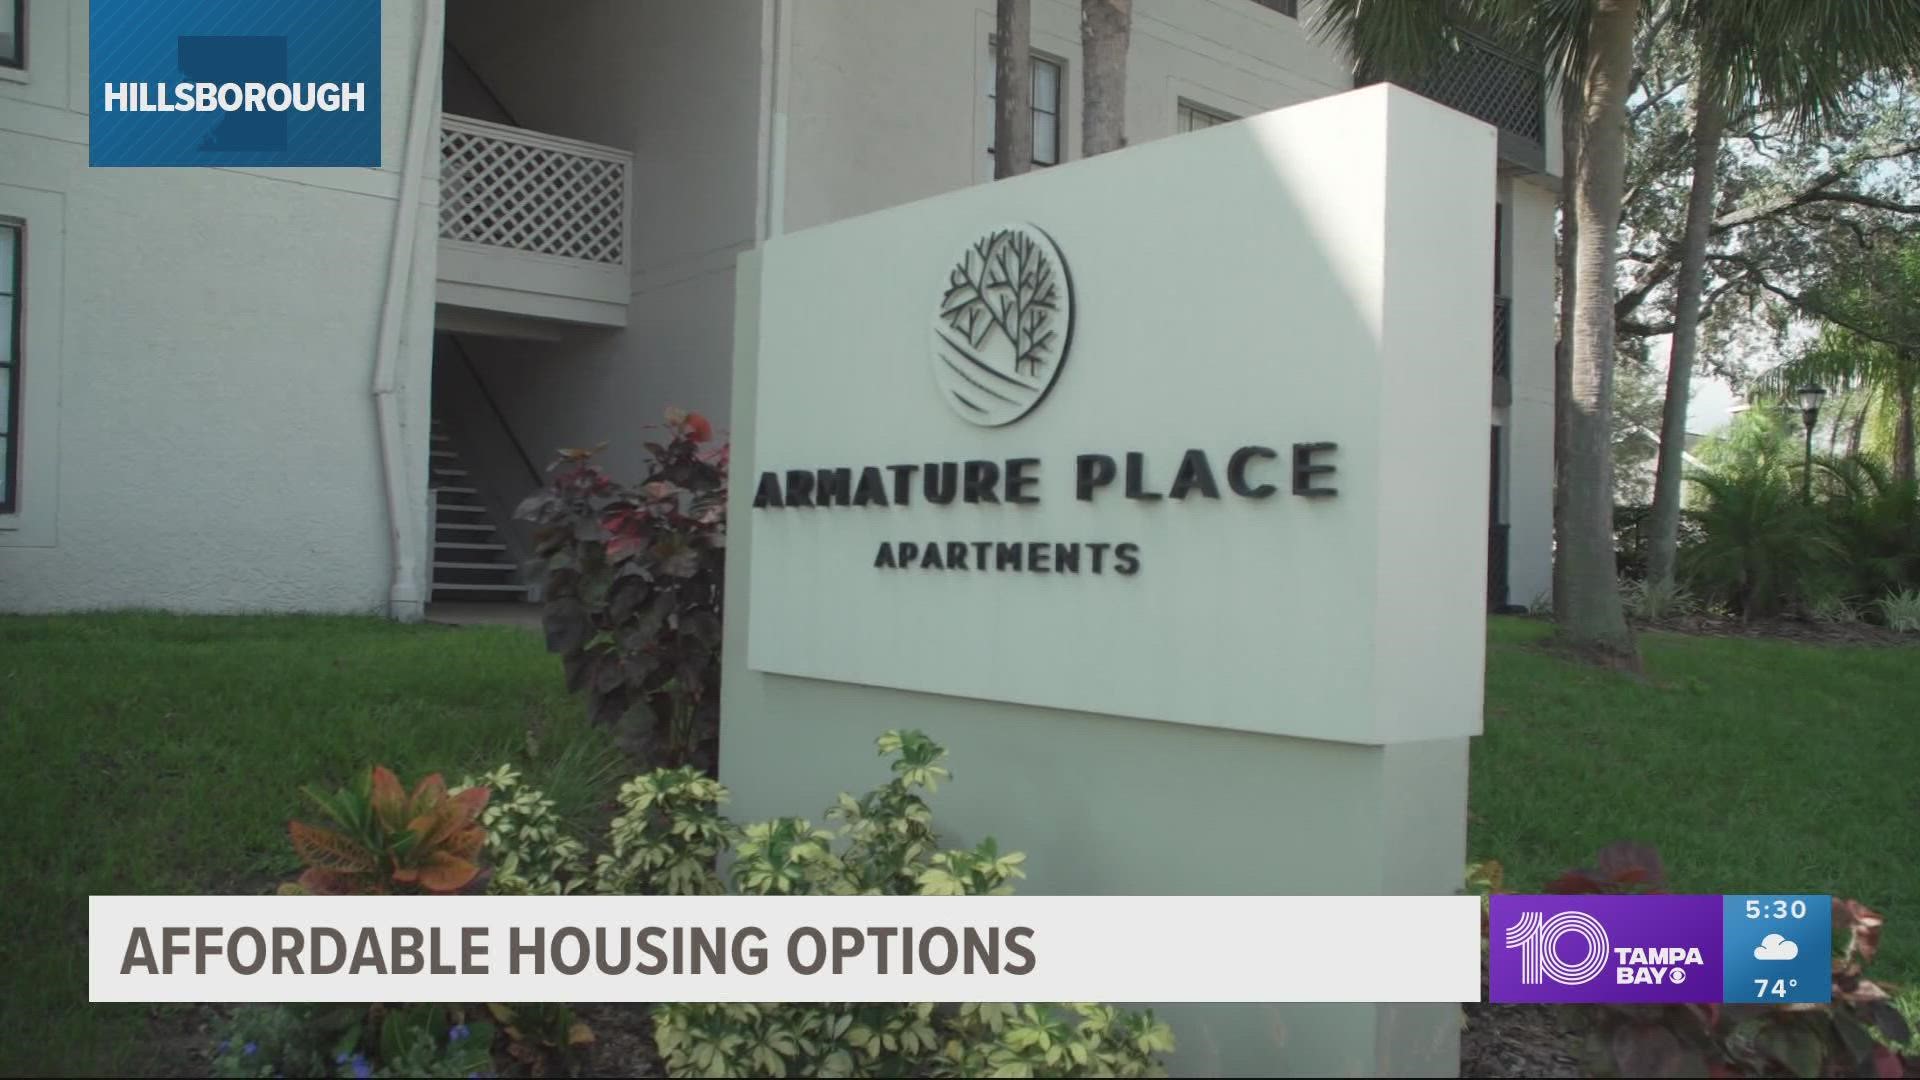 Armature Place Apartments will soon be converted to affordable housing.